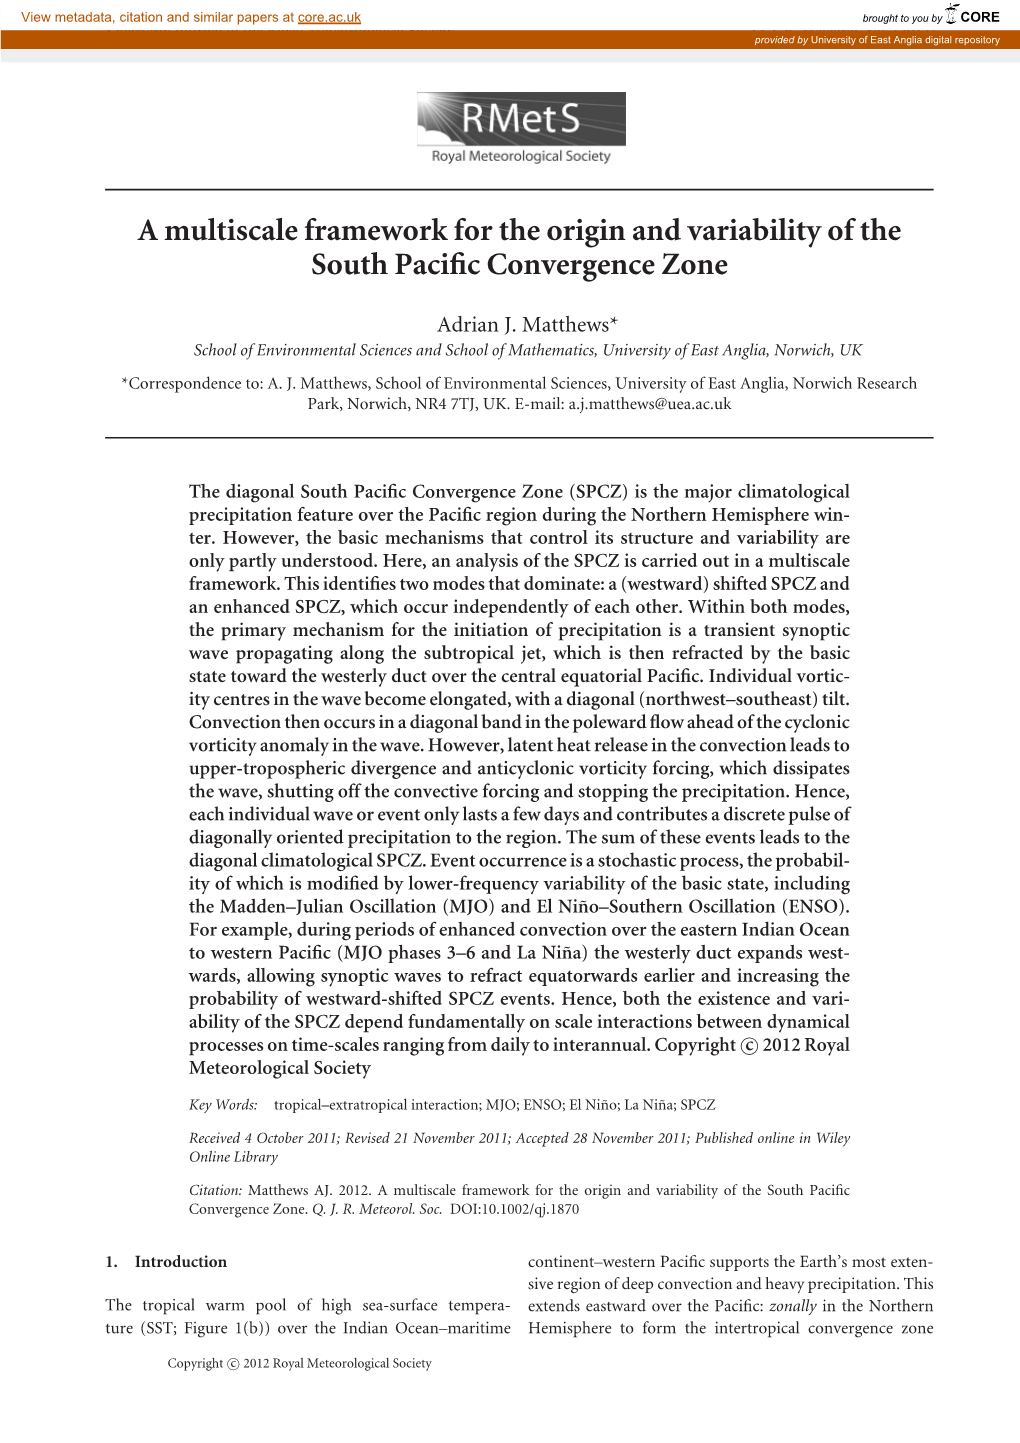 A Multiscale Framework for the Origin and Variability of the South Pacific